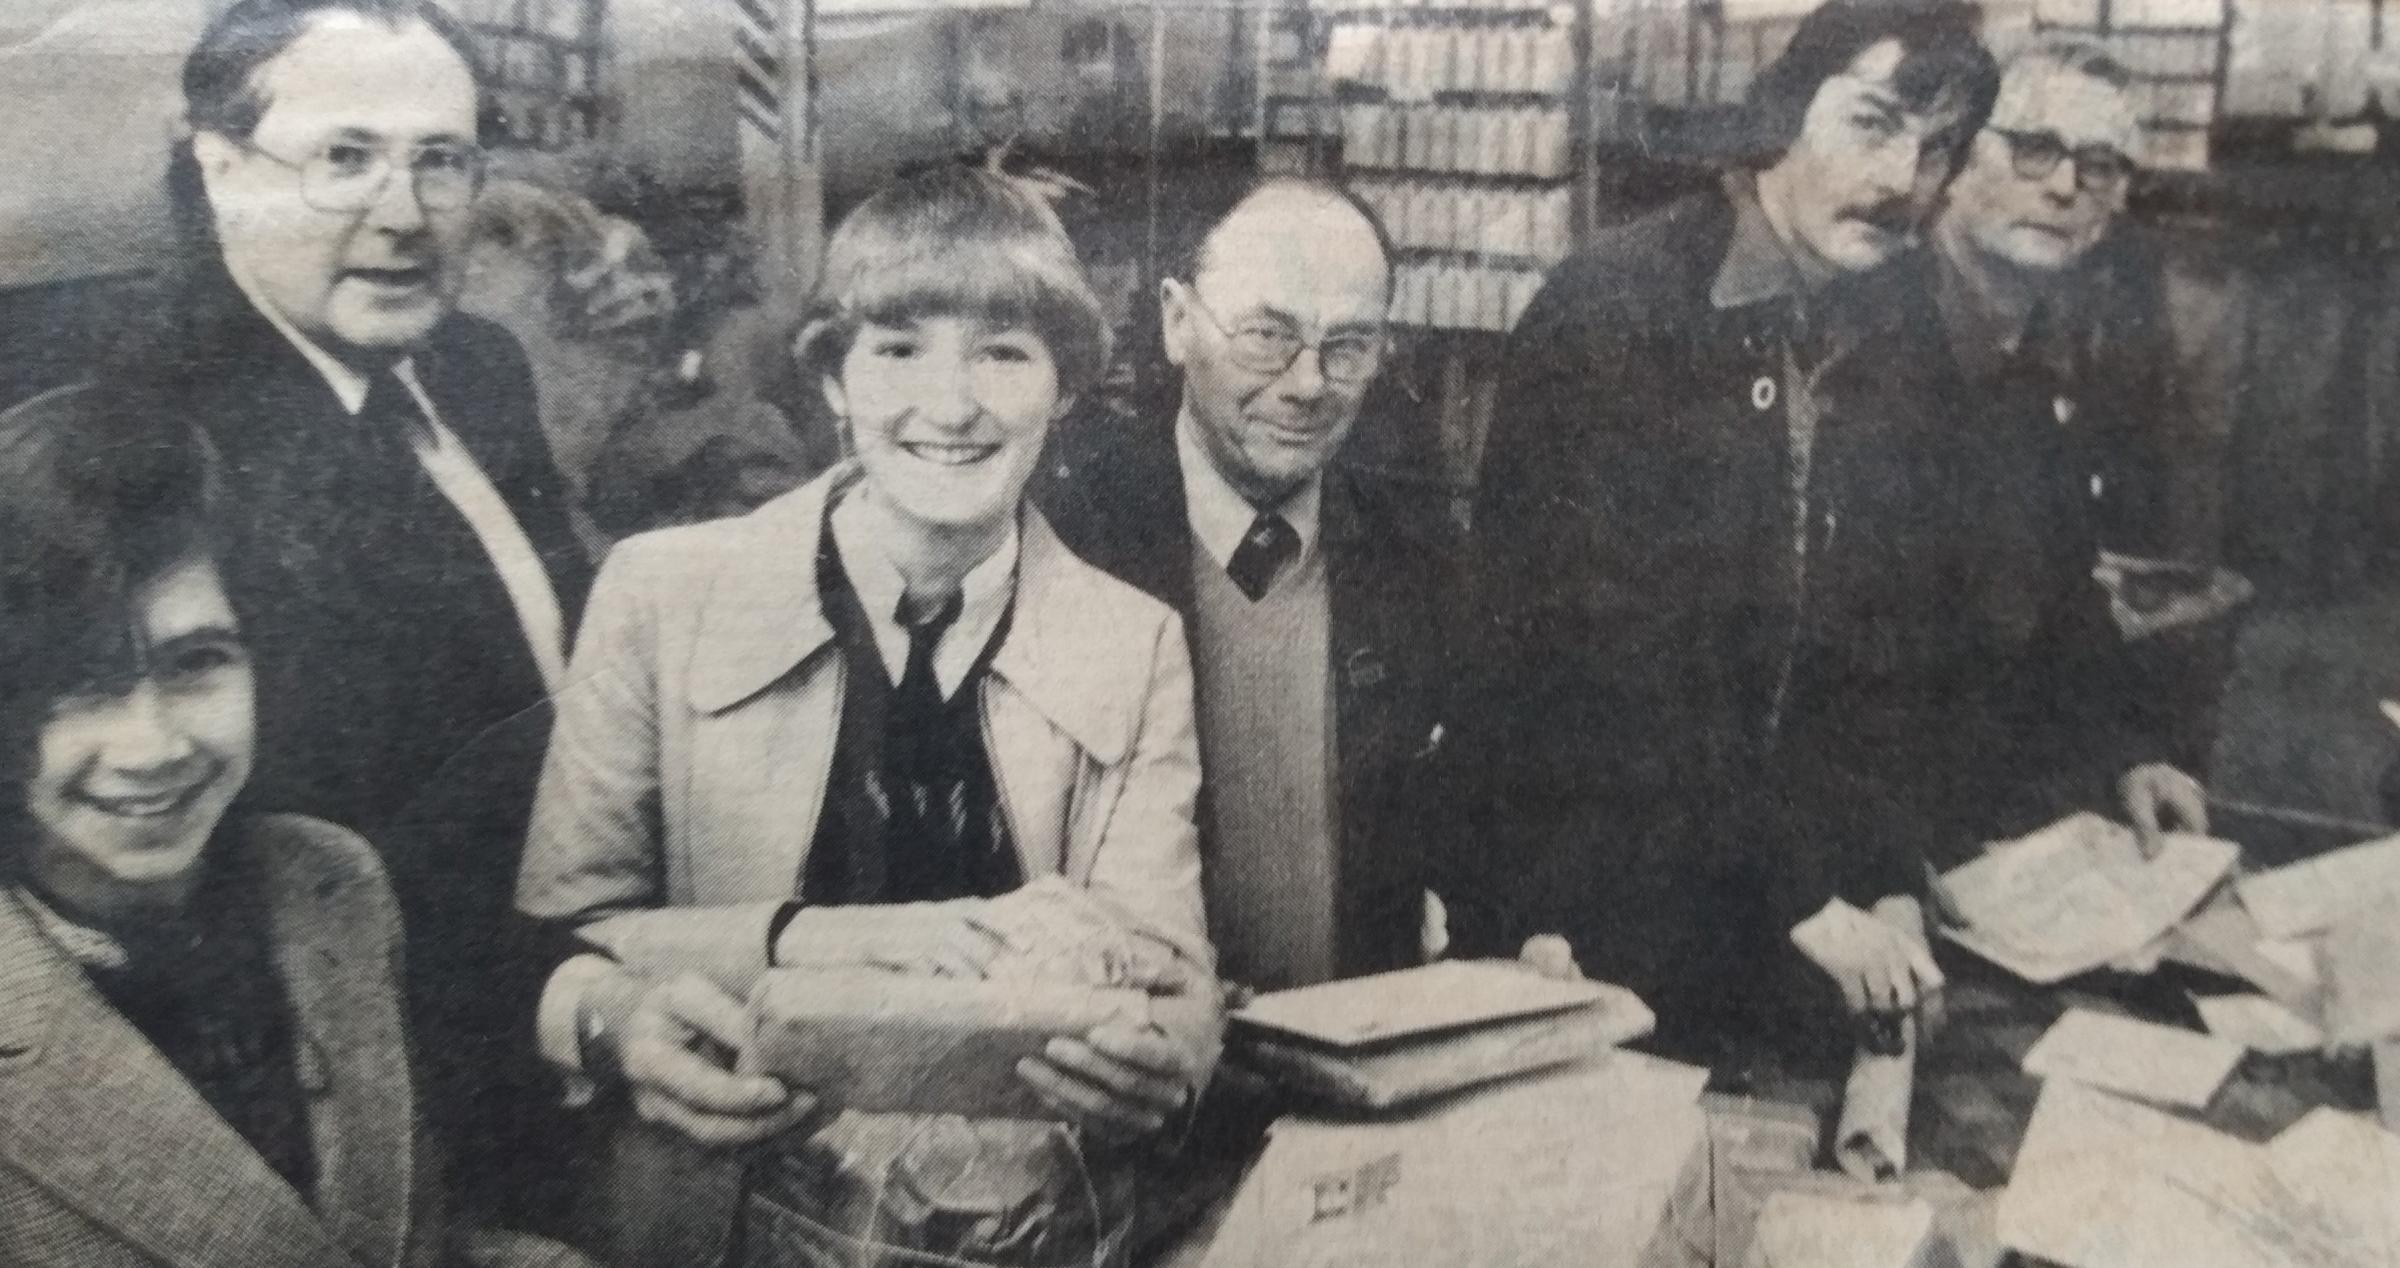 Post Office essay competition winner Melissa Barlow, left, and runner-up Sian Watkins, both Alice Ottley pupils, were given a tour of the sorting office in the run-up to Christmas in 1979 as part of their prize 